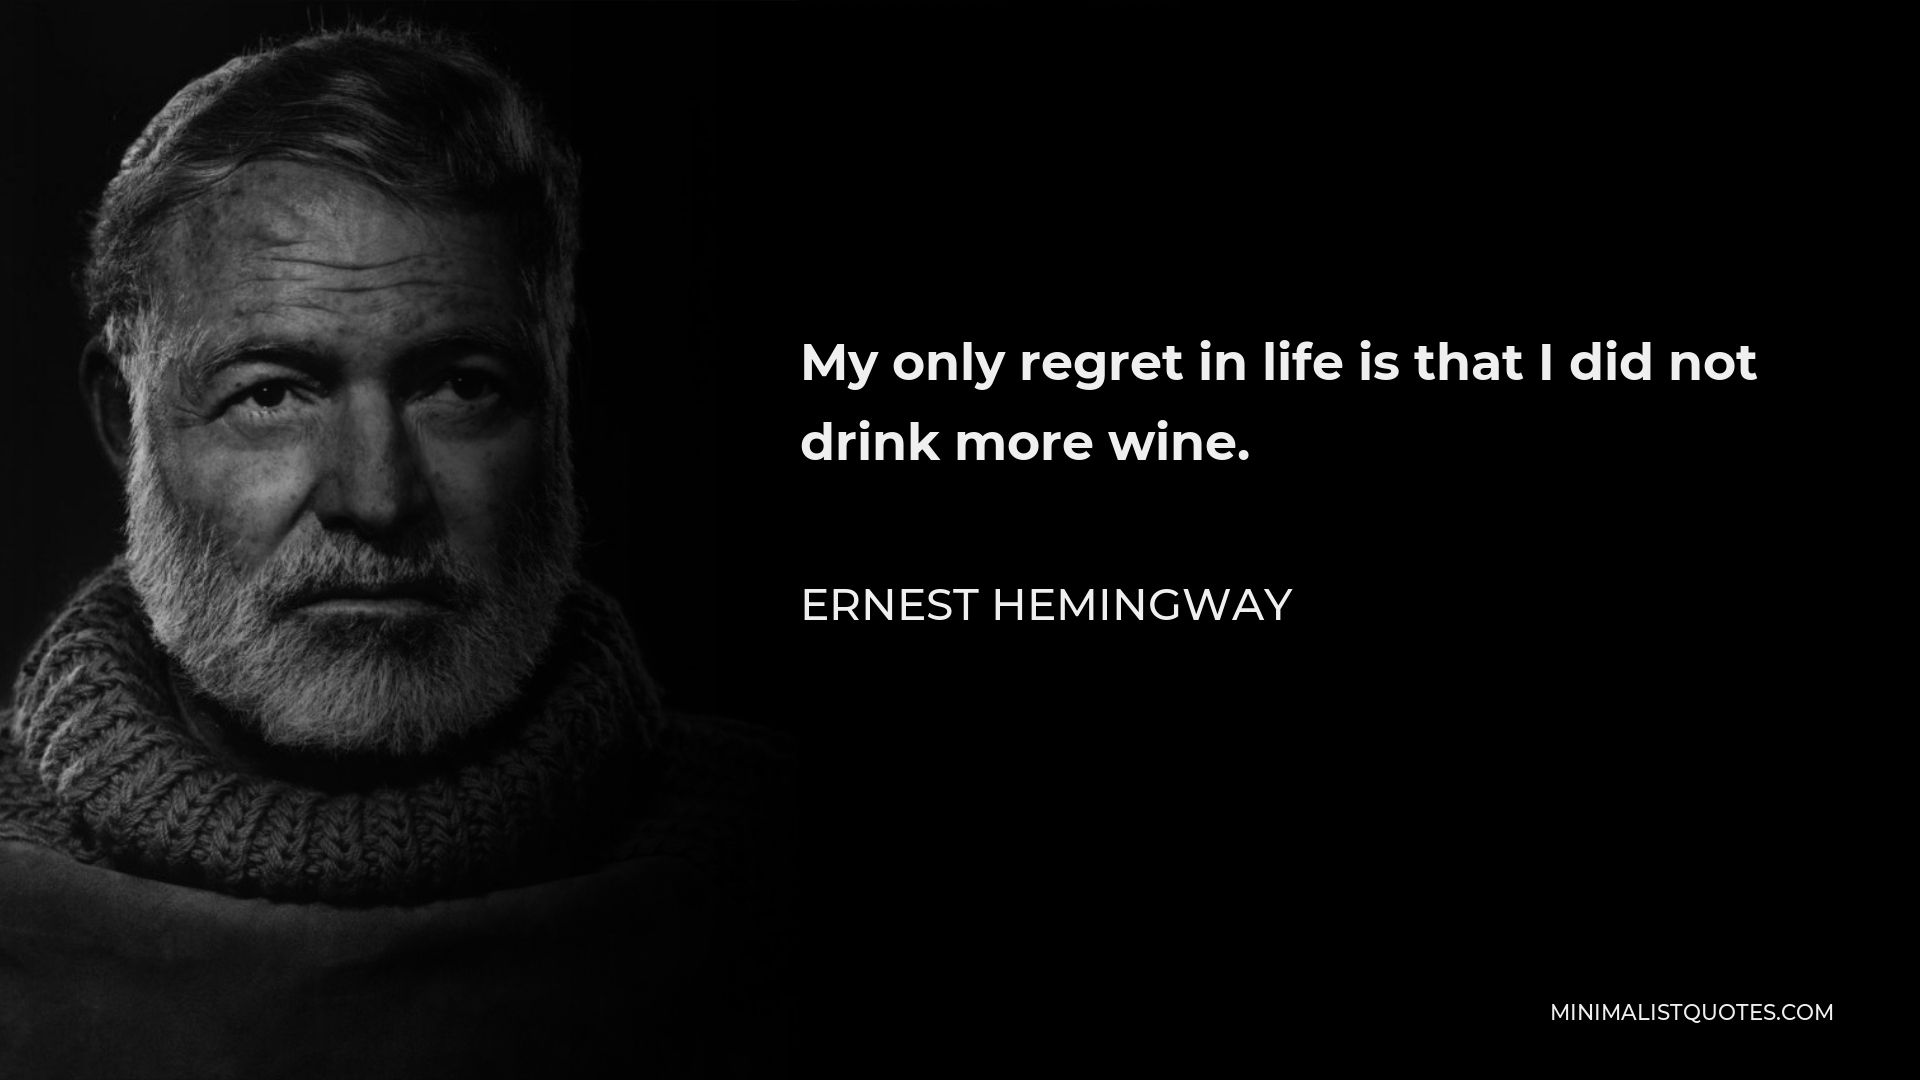 Ernest Hemingway Quote - My only regret in life is that I did not drink more wine.